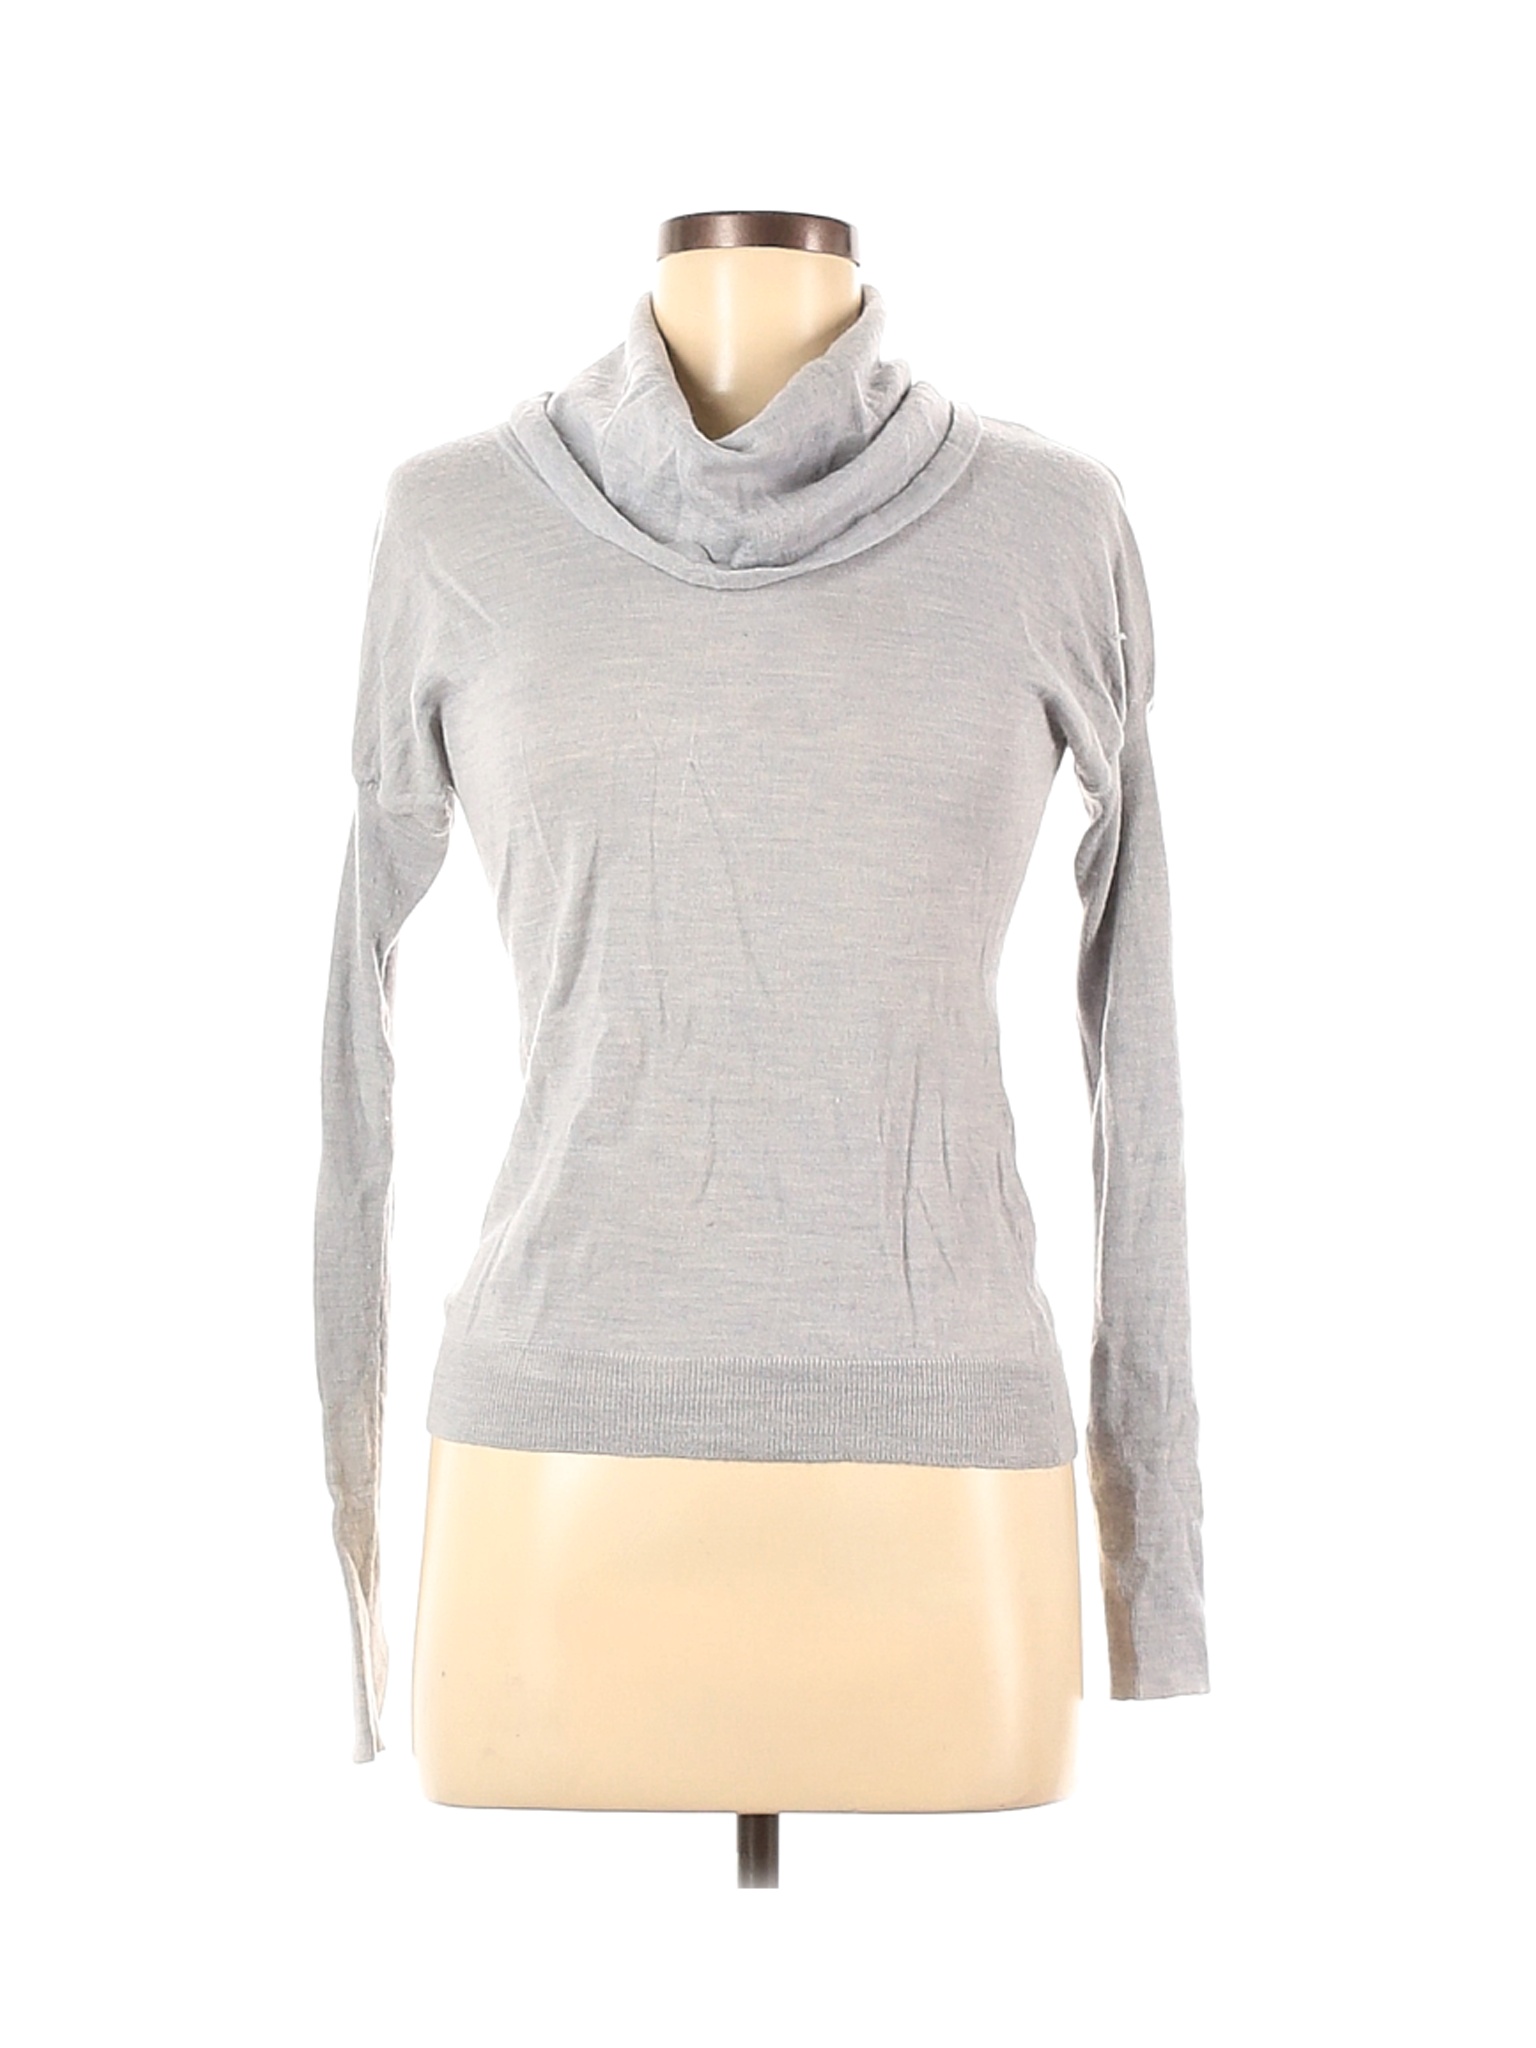 The Limited Women Gray Long Sleeve Top M | eBay